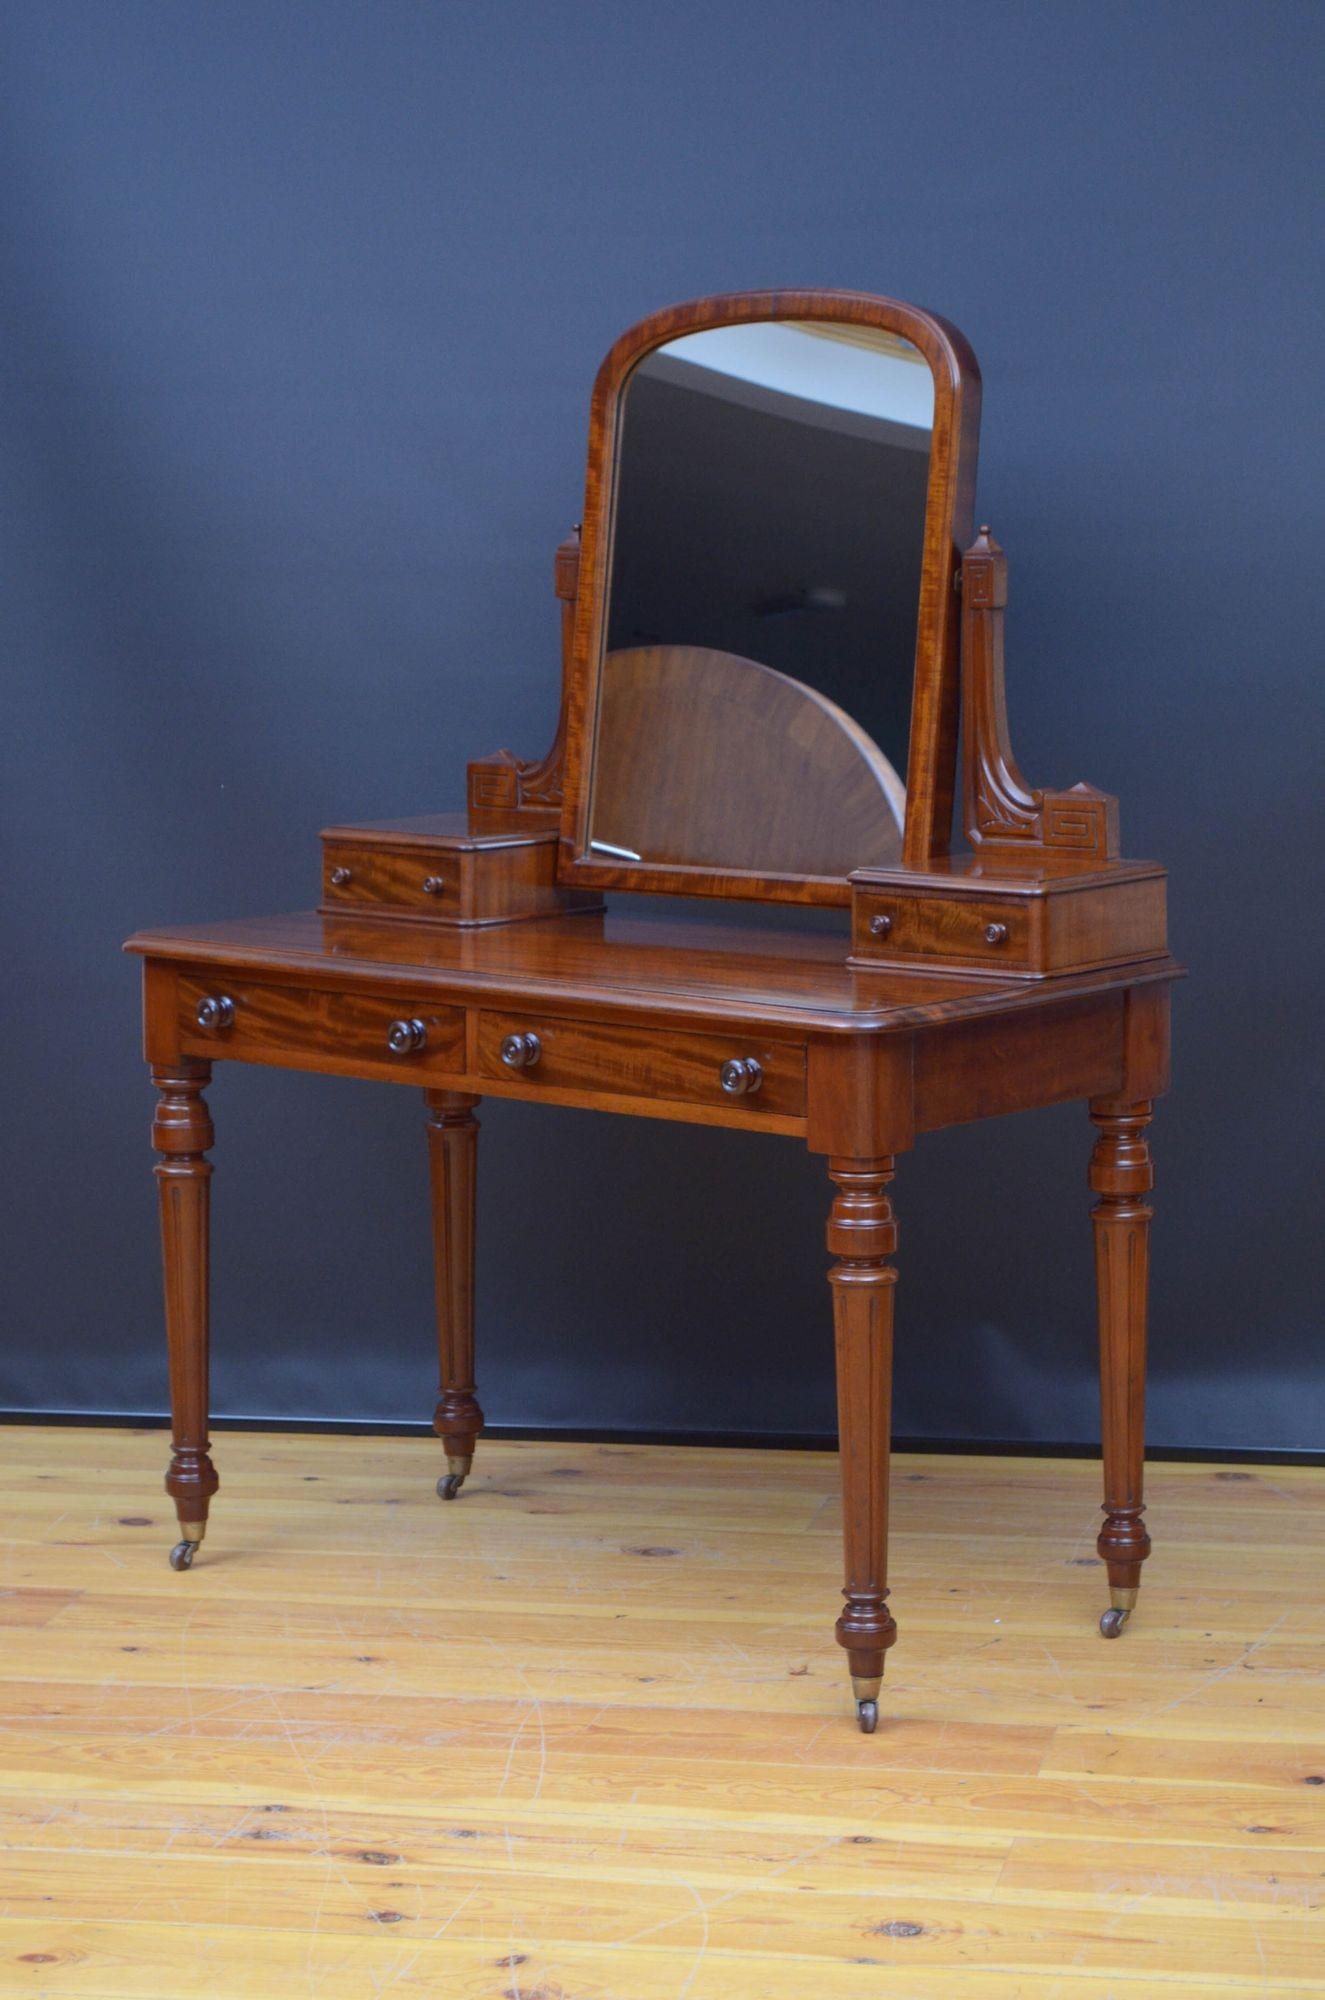 St033 Fine quality English Victorian dressing table in mahogany, having arched mirror with replacement glass, in carved supports with Greek key decoration terminating in small jewellery drawers and figured mahogany top with moulded edge and two